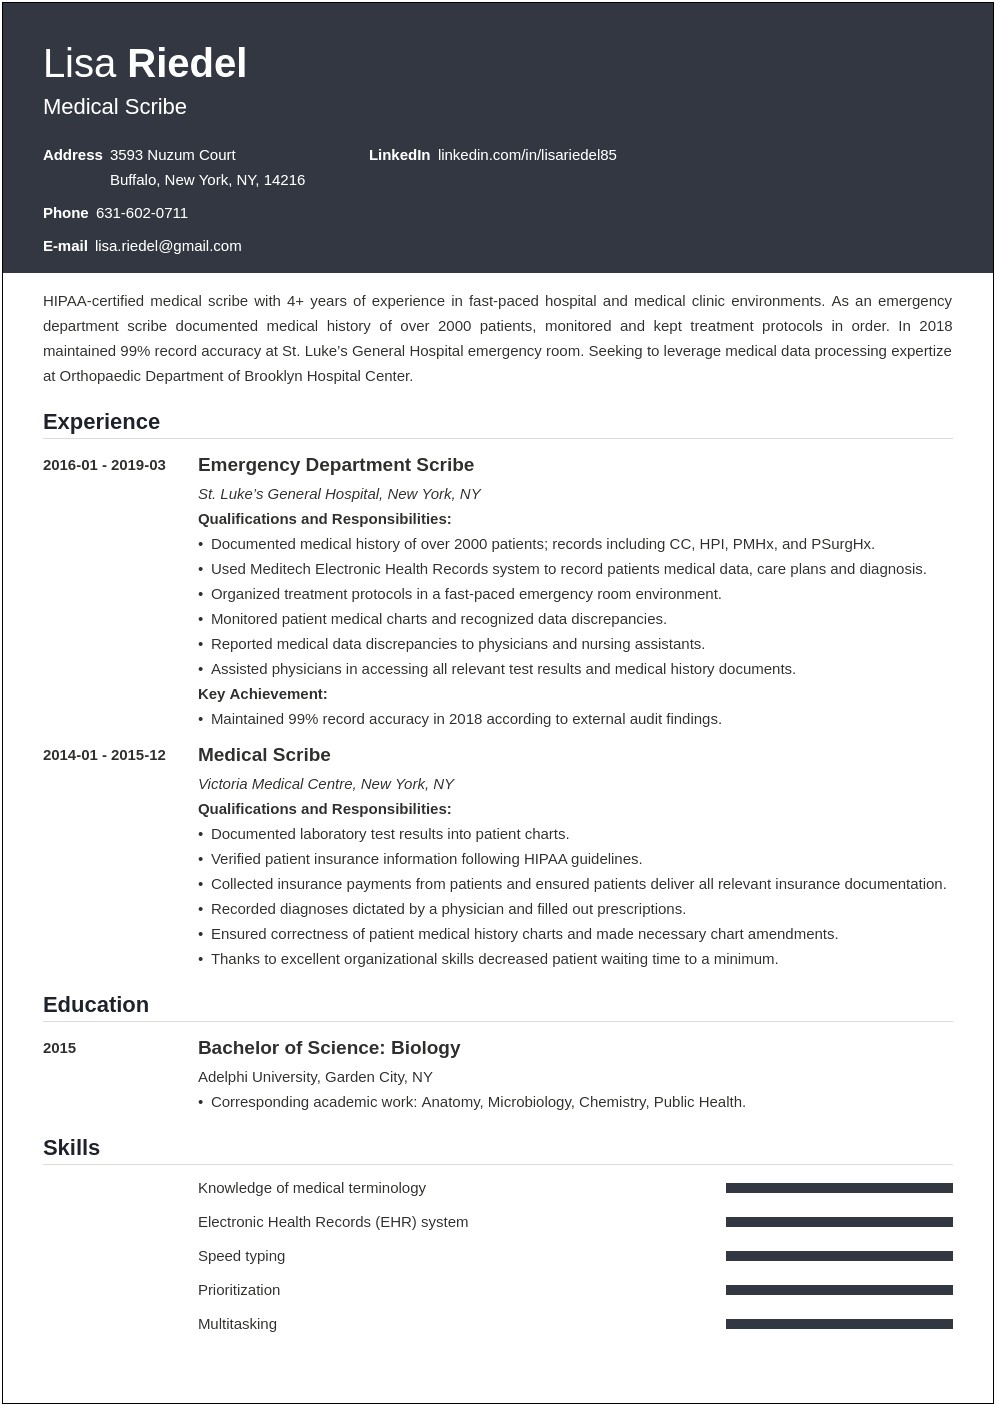 Resume Examples For Medical Scribe